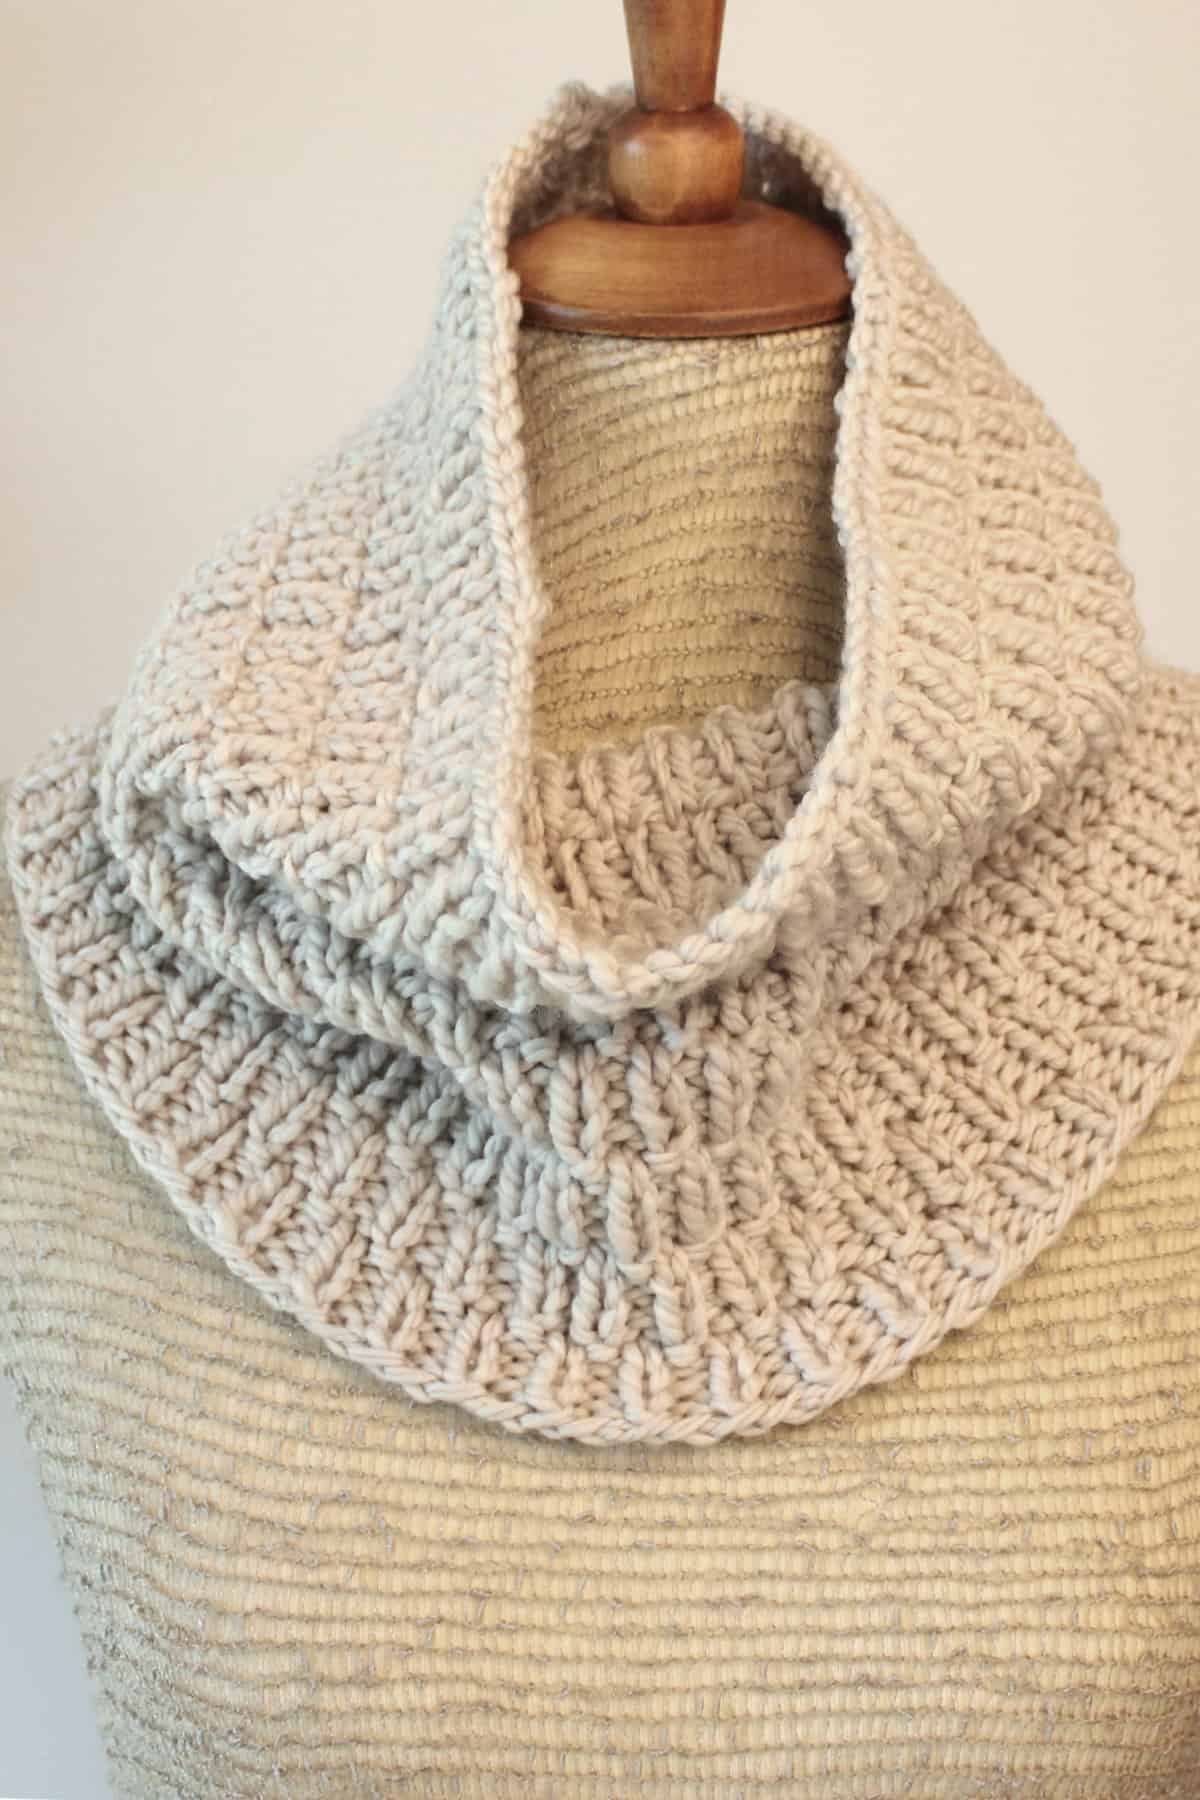 Short Cowl Scarf knit in long raindrops knit stitch pattern with beige color yarn displayed on mannequin.